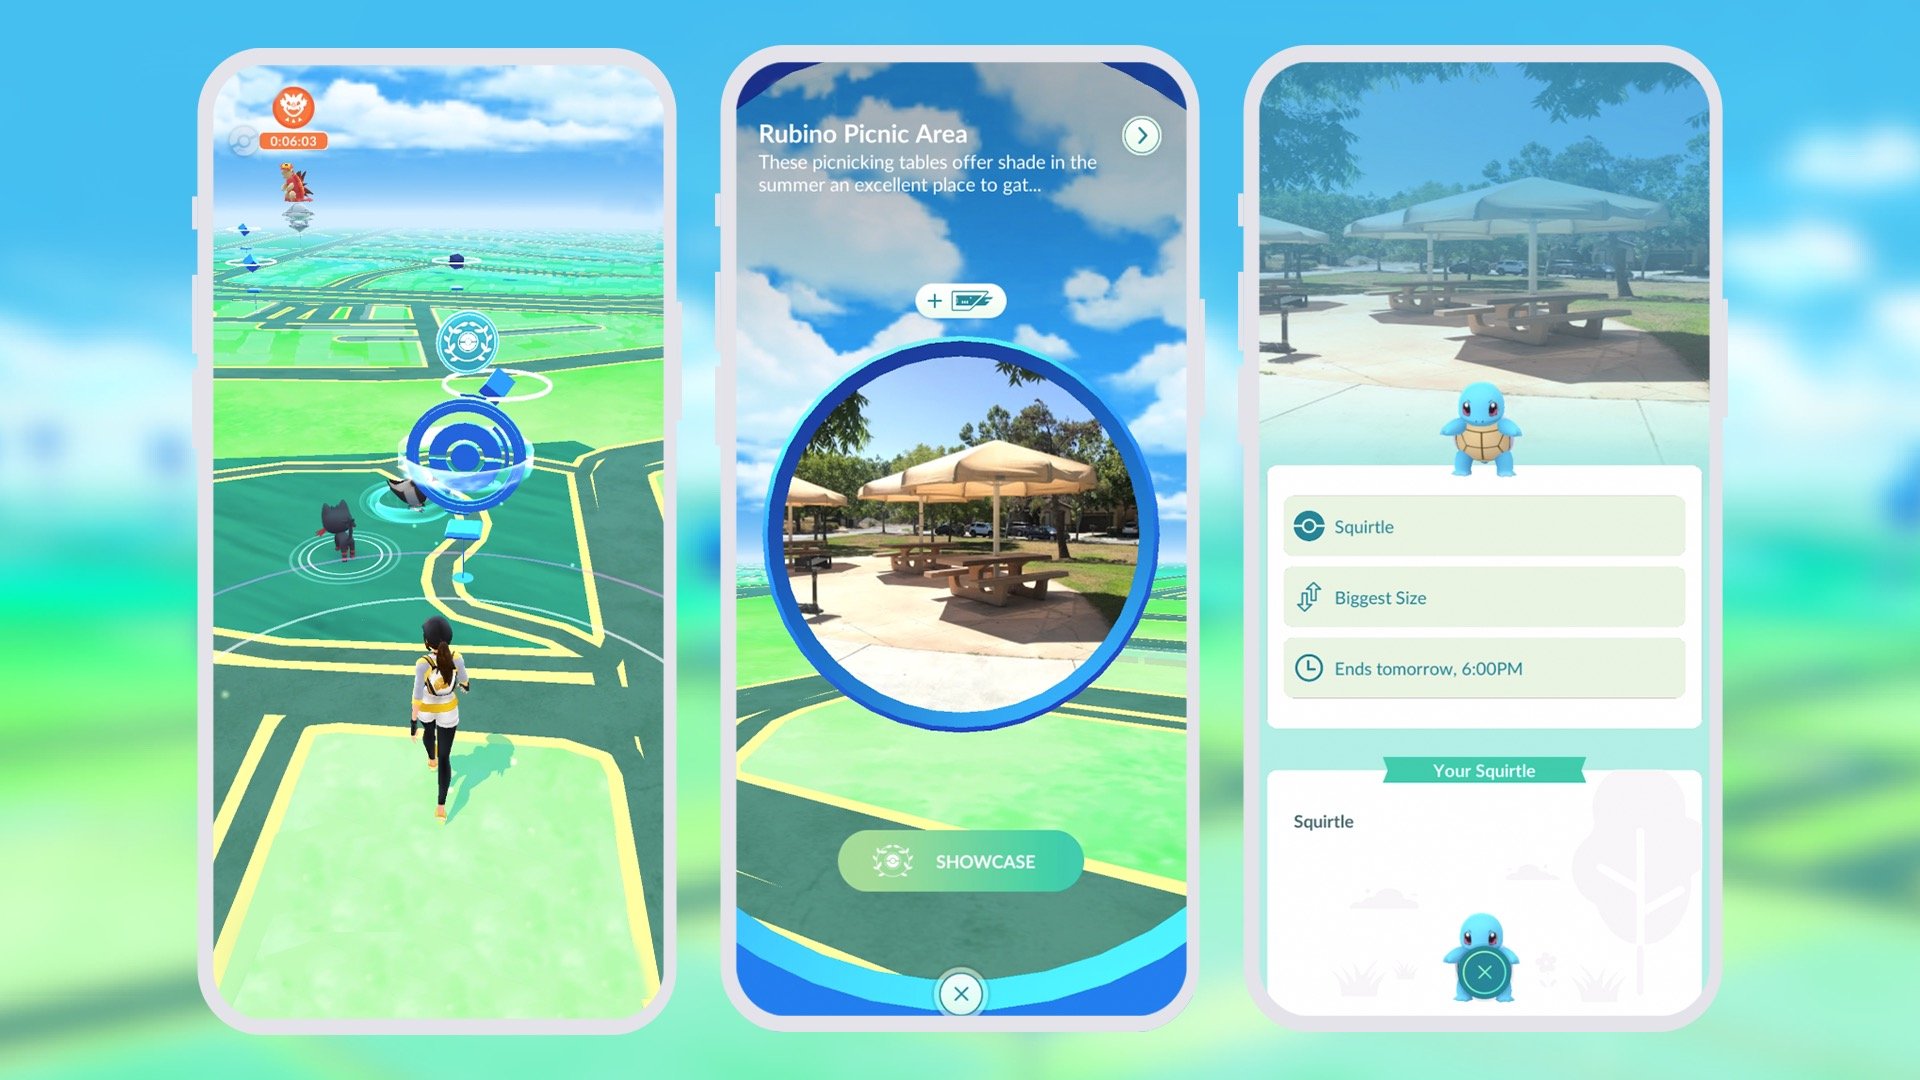 Pokémon Go All-in-One #151 tasks for the shiny Mew Masterwork Research  quest